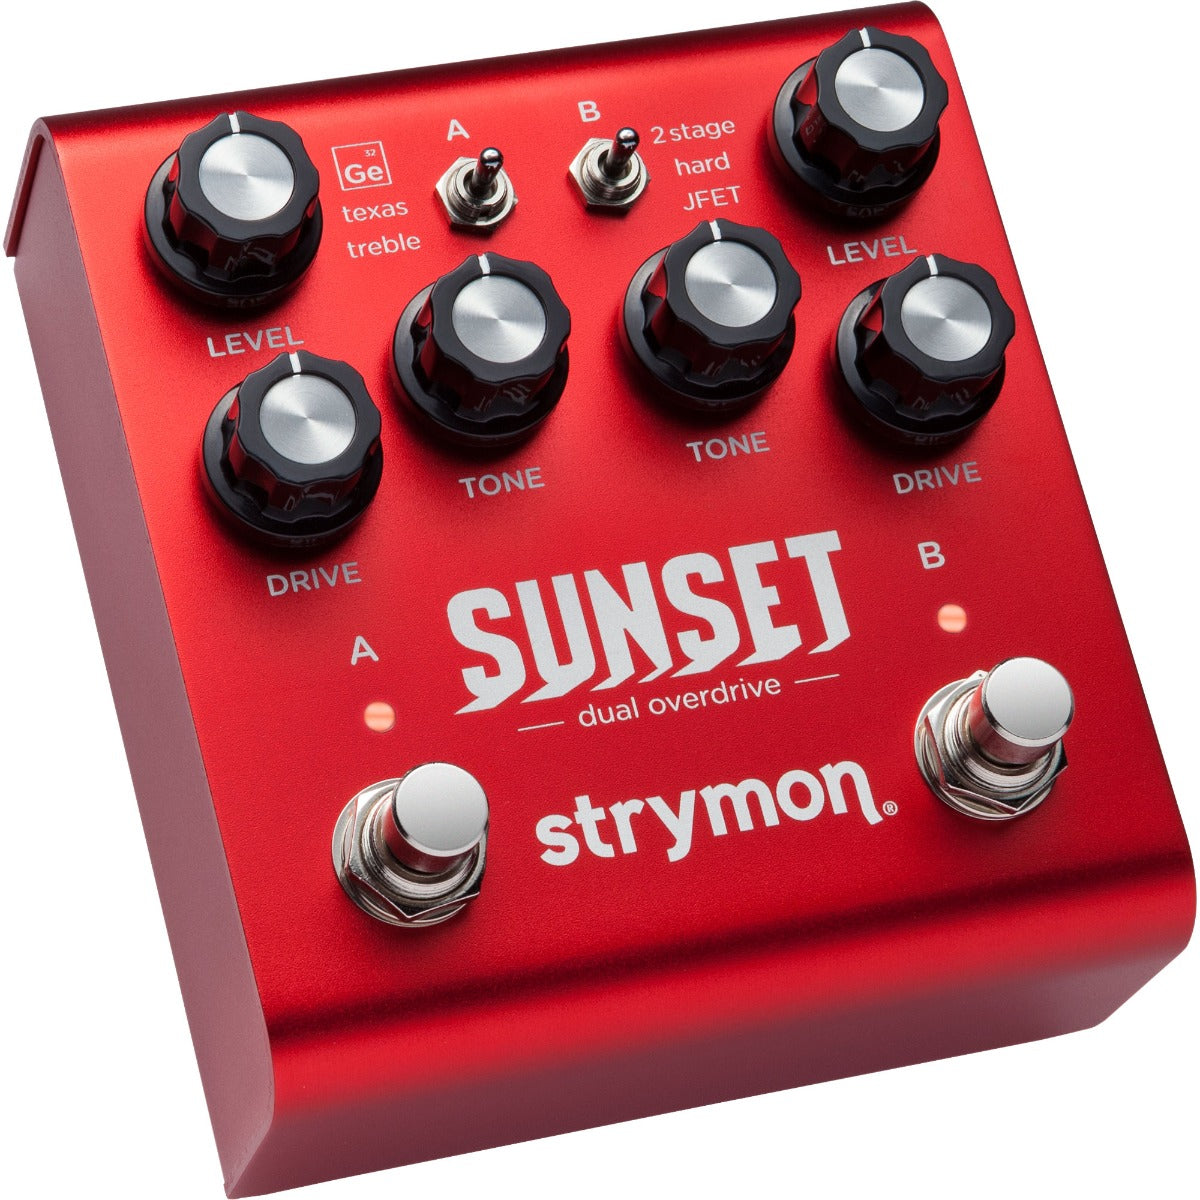 Strymon Sunset Dual Overdrive Pedal View 1